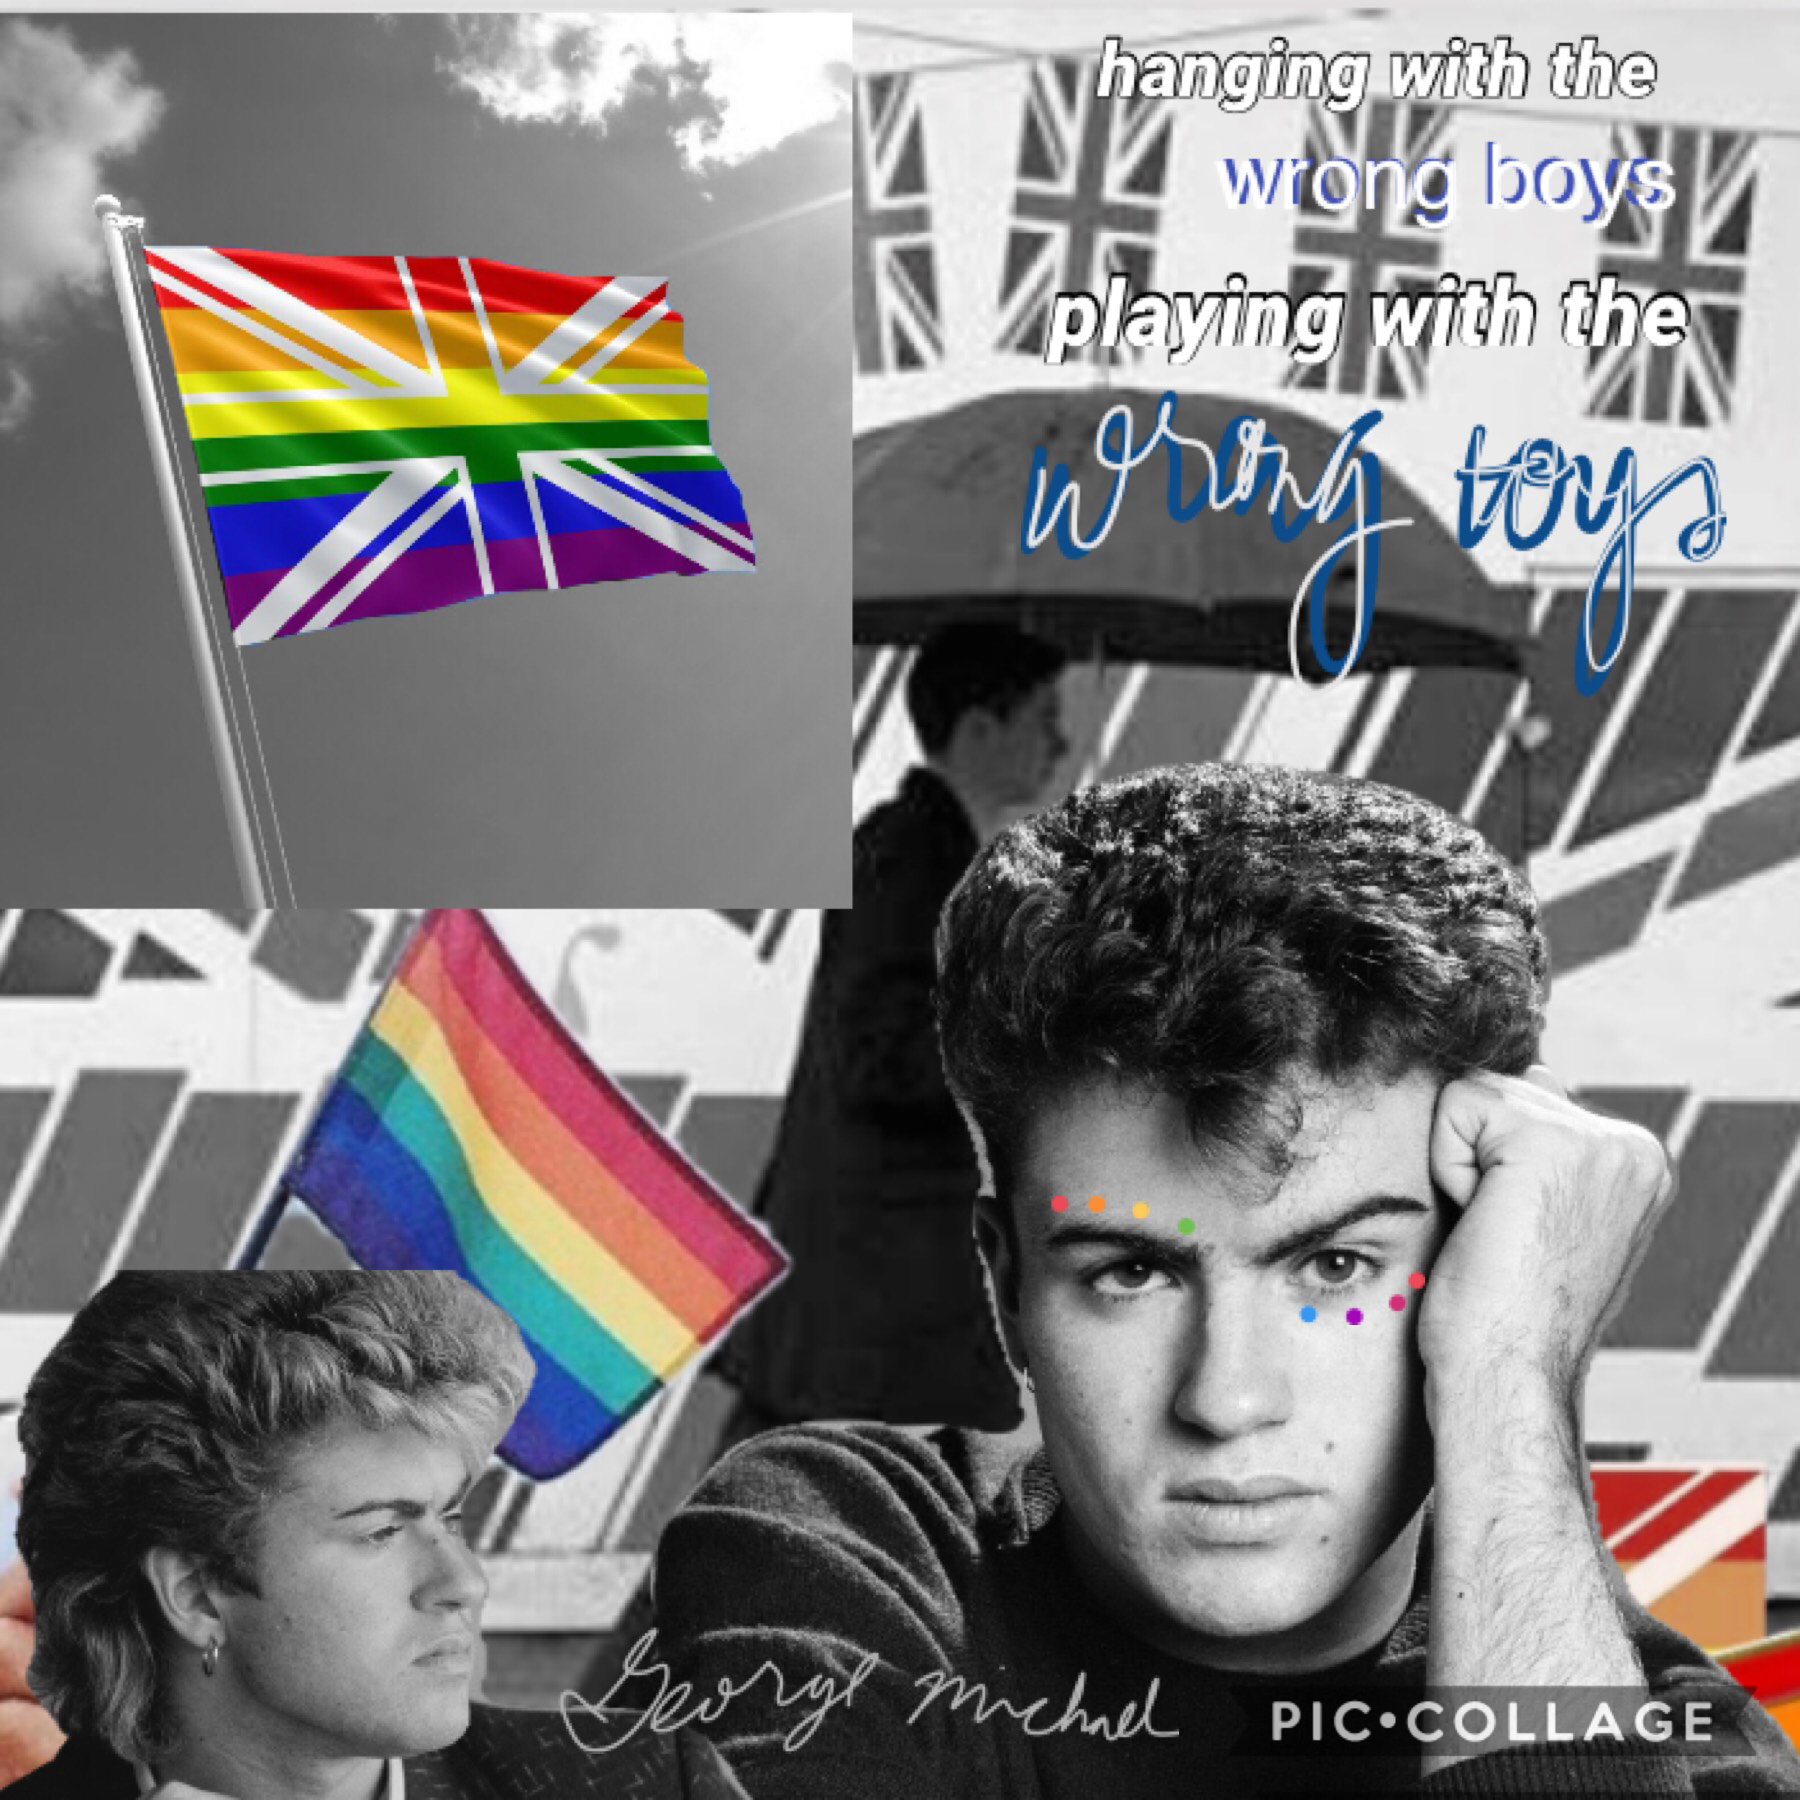 ok so I put effort and time into this but it still looks trash.. the point is that we Stan George Michael🏳️‍🌈🏳️‍🌈💖
19-2-19